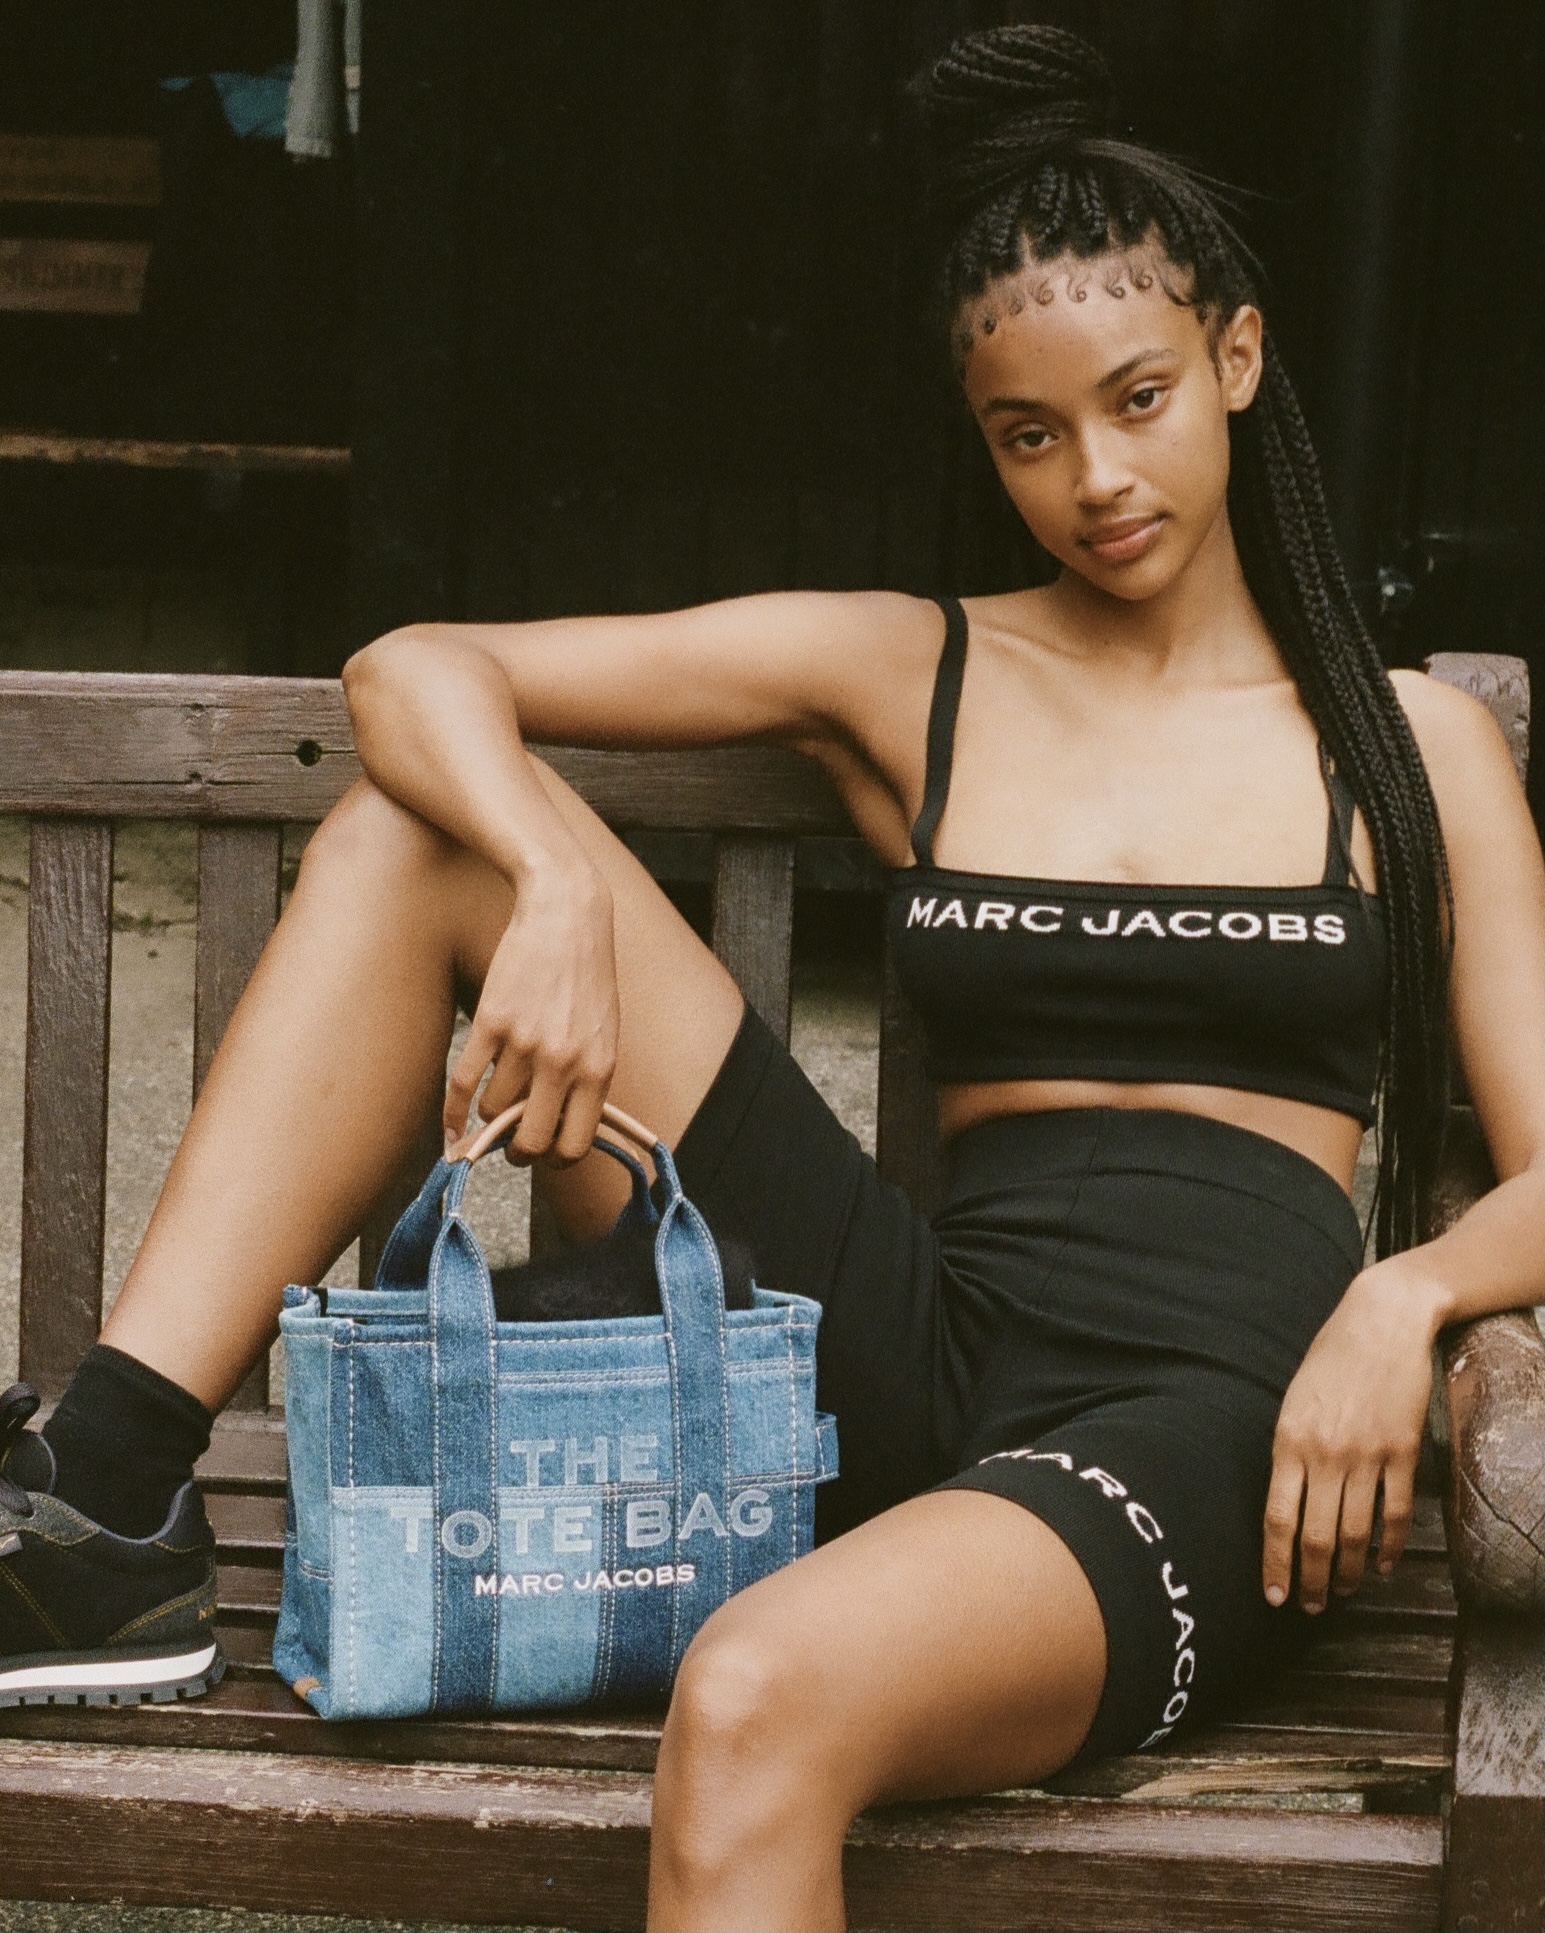 Marc Jacobs - Florrie wears THE DENIM CAMERA BAG. Shop now: https:// marcjacobs.social/thedenimcamerabag Photographed by Alexandra Gordienko  Styled by Danielle Emerson June 26, 2021 in London, England.